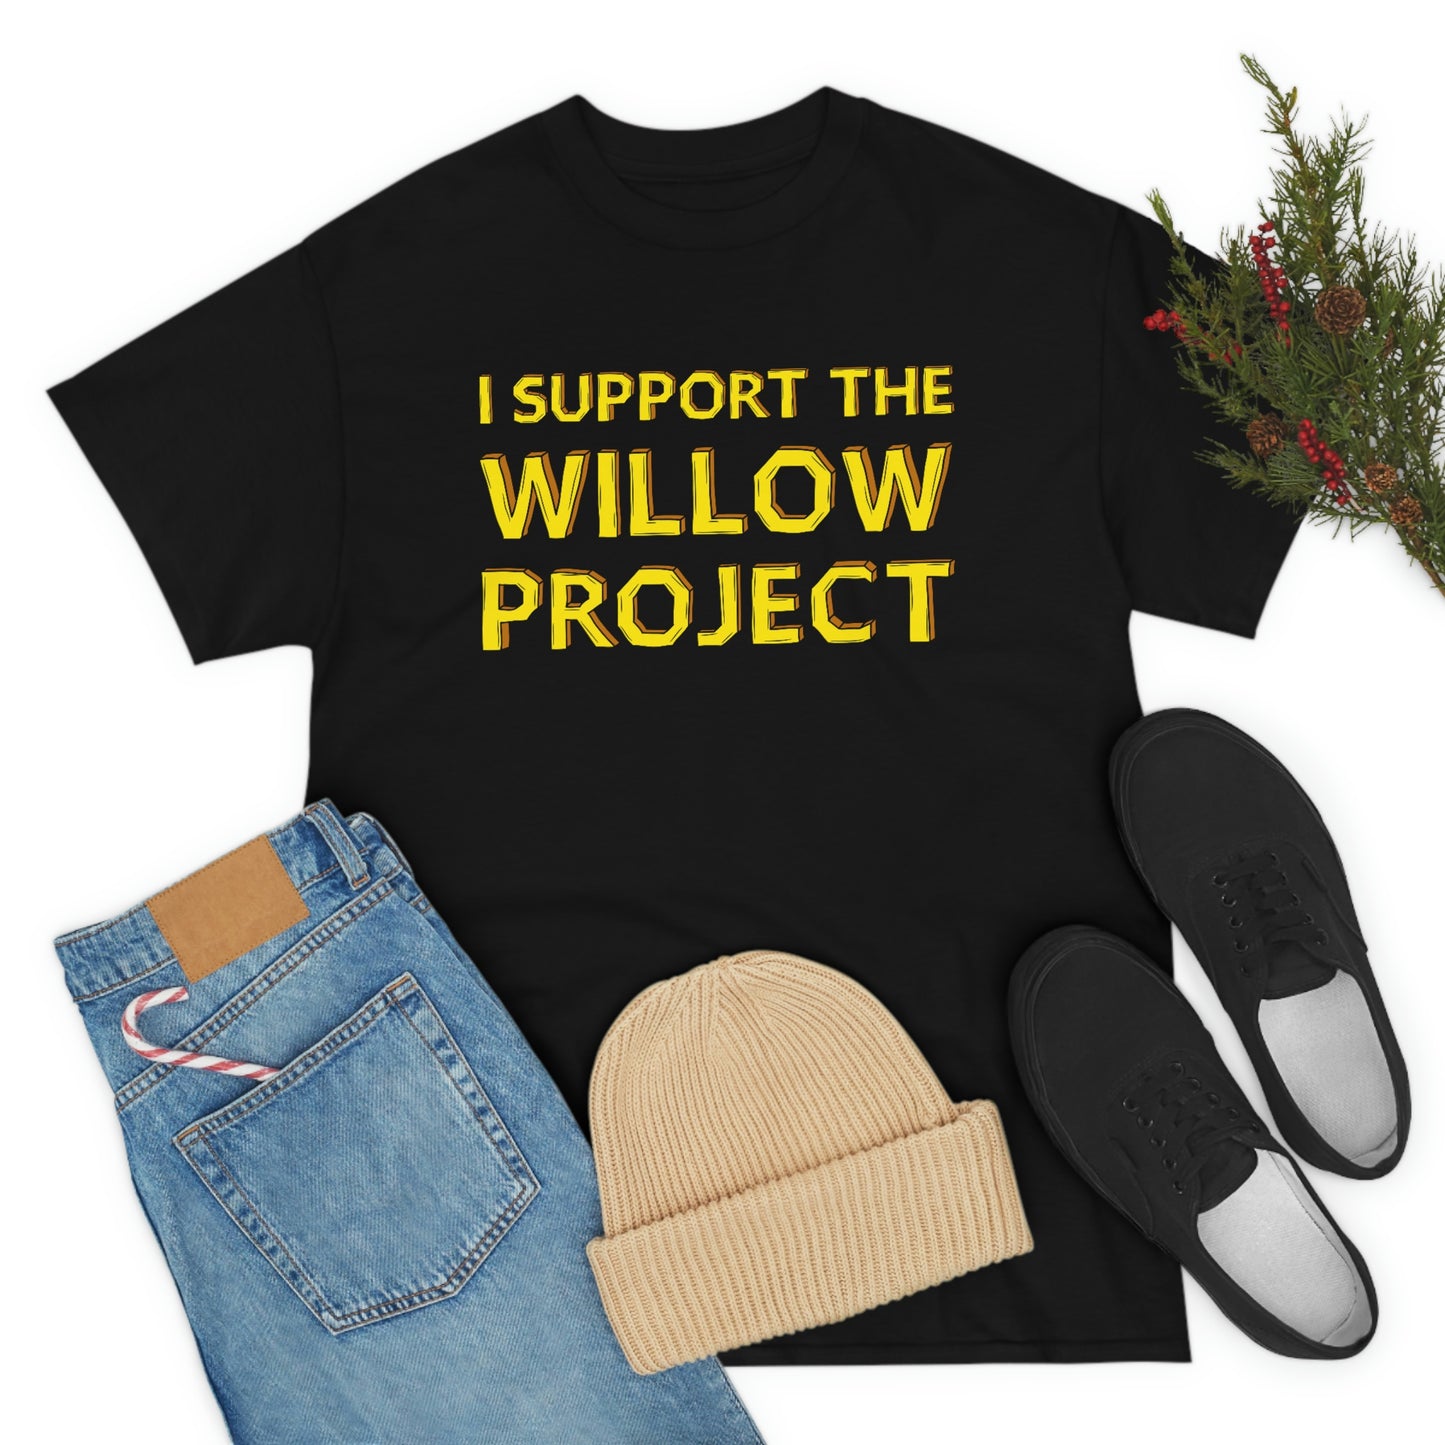 I Support the Willow Project - Unisex Heavy Cotton Tee